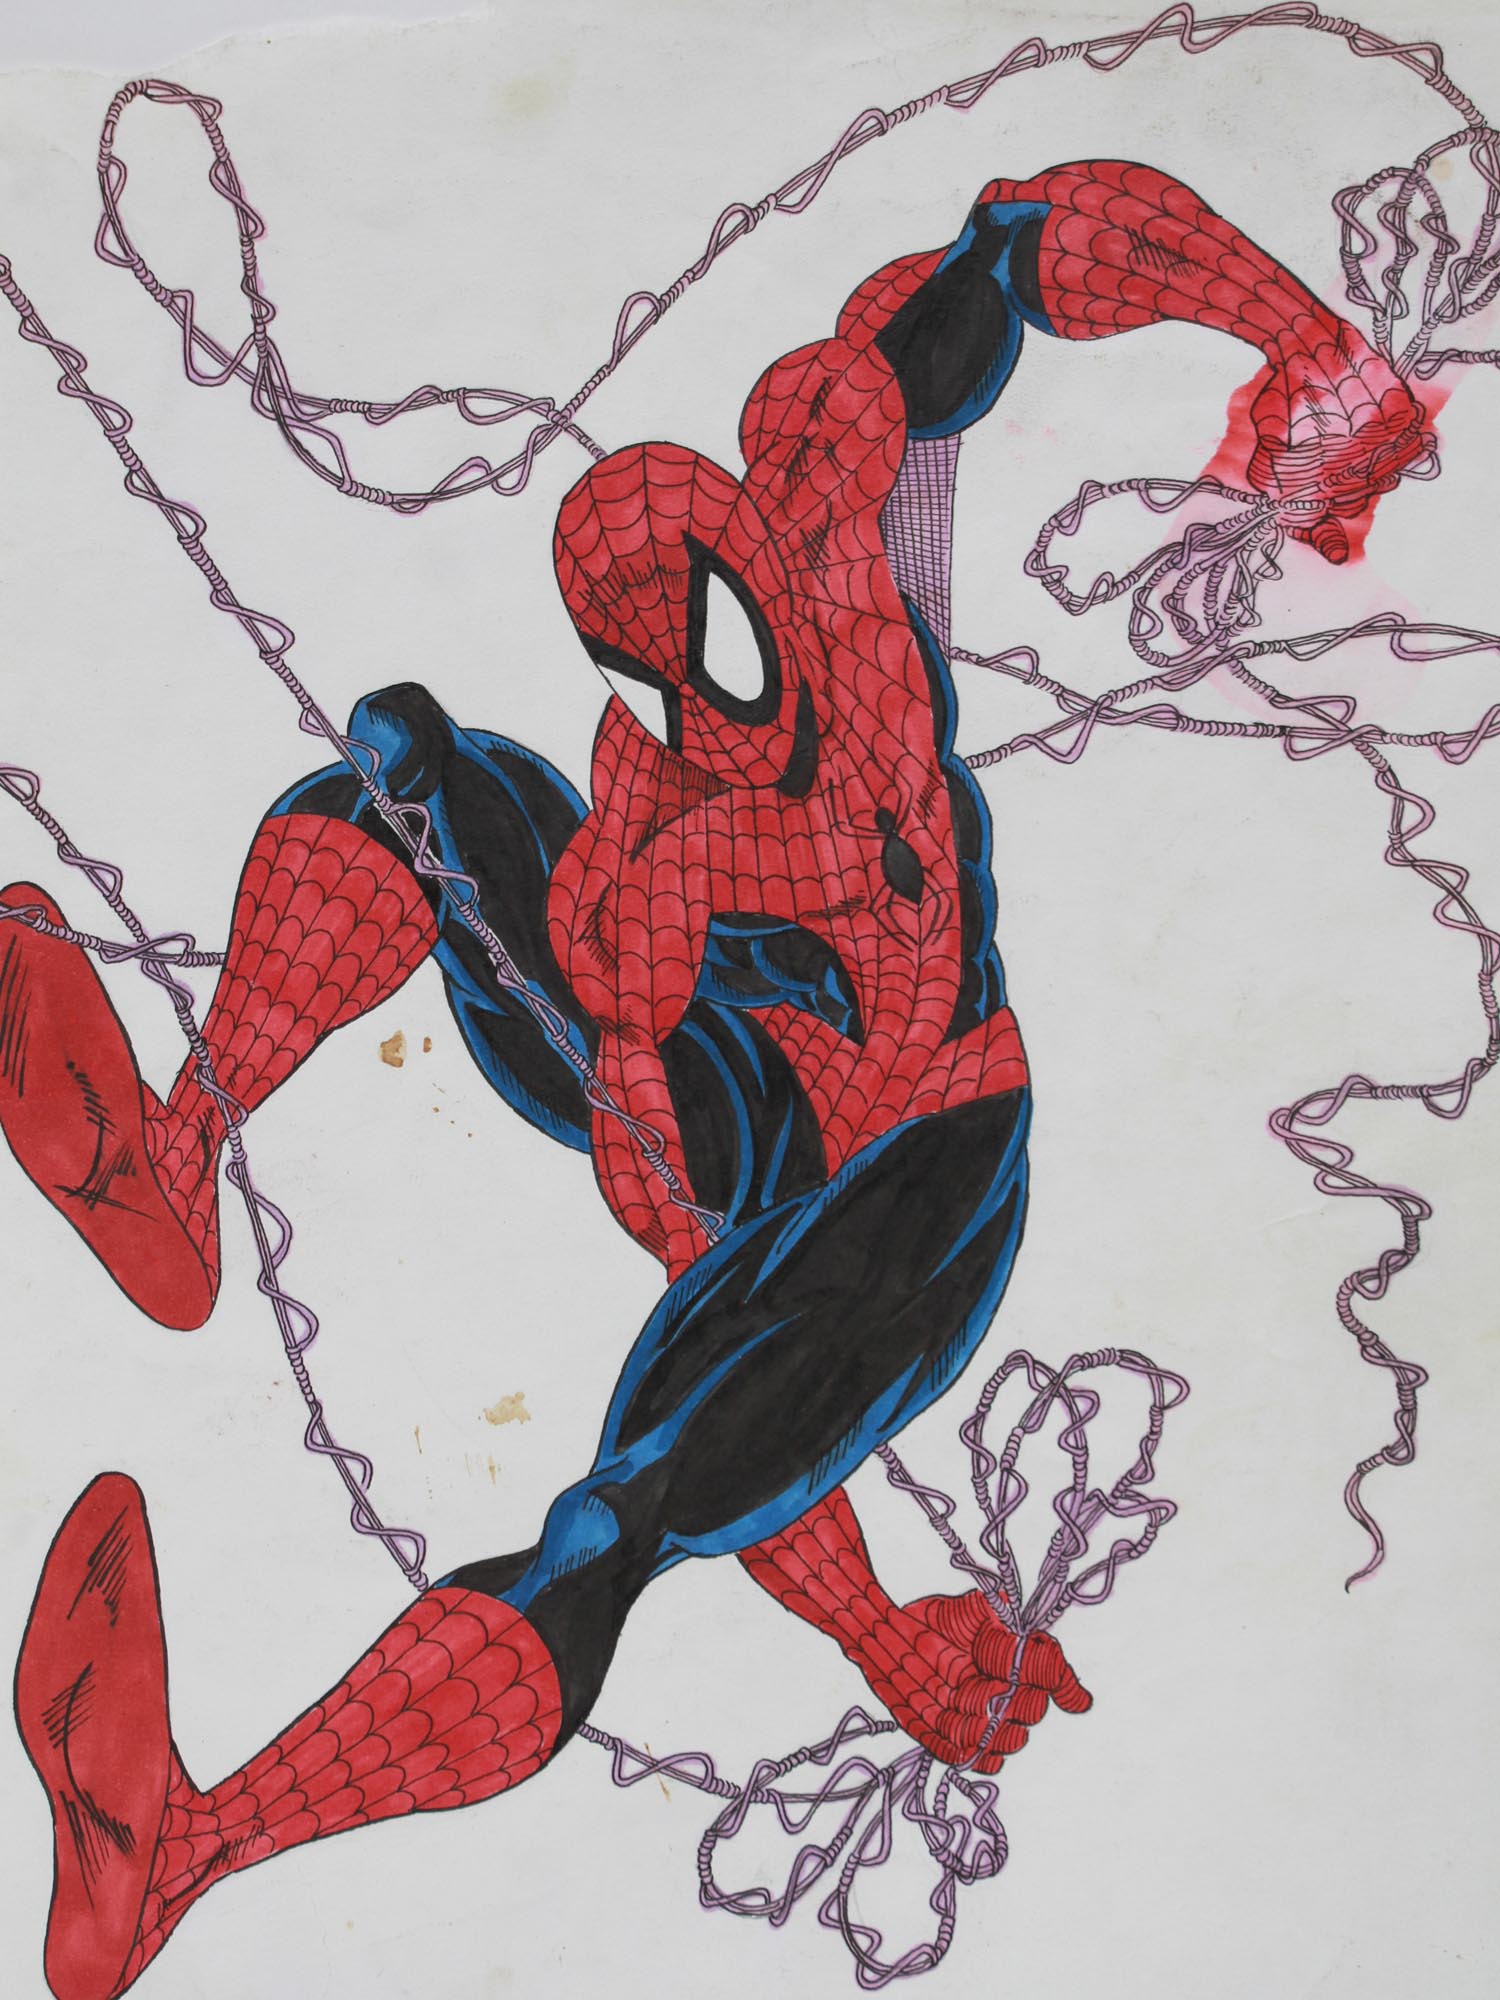 2 SPIDER-MAN PAINTINGS SIGNED BY HECTOR HERNANDEZ PIC-3